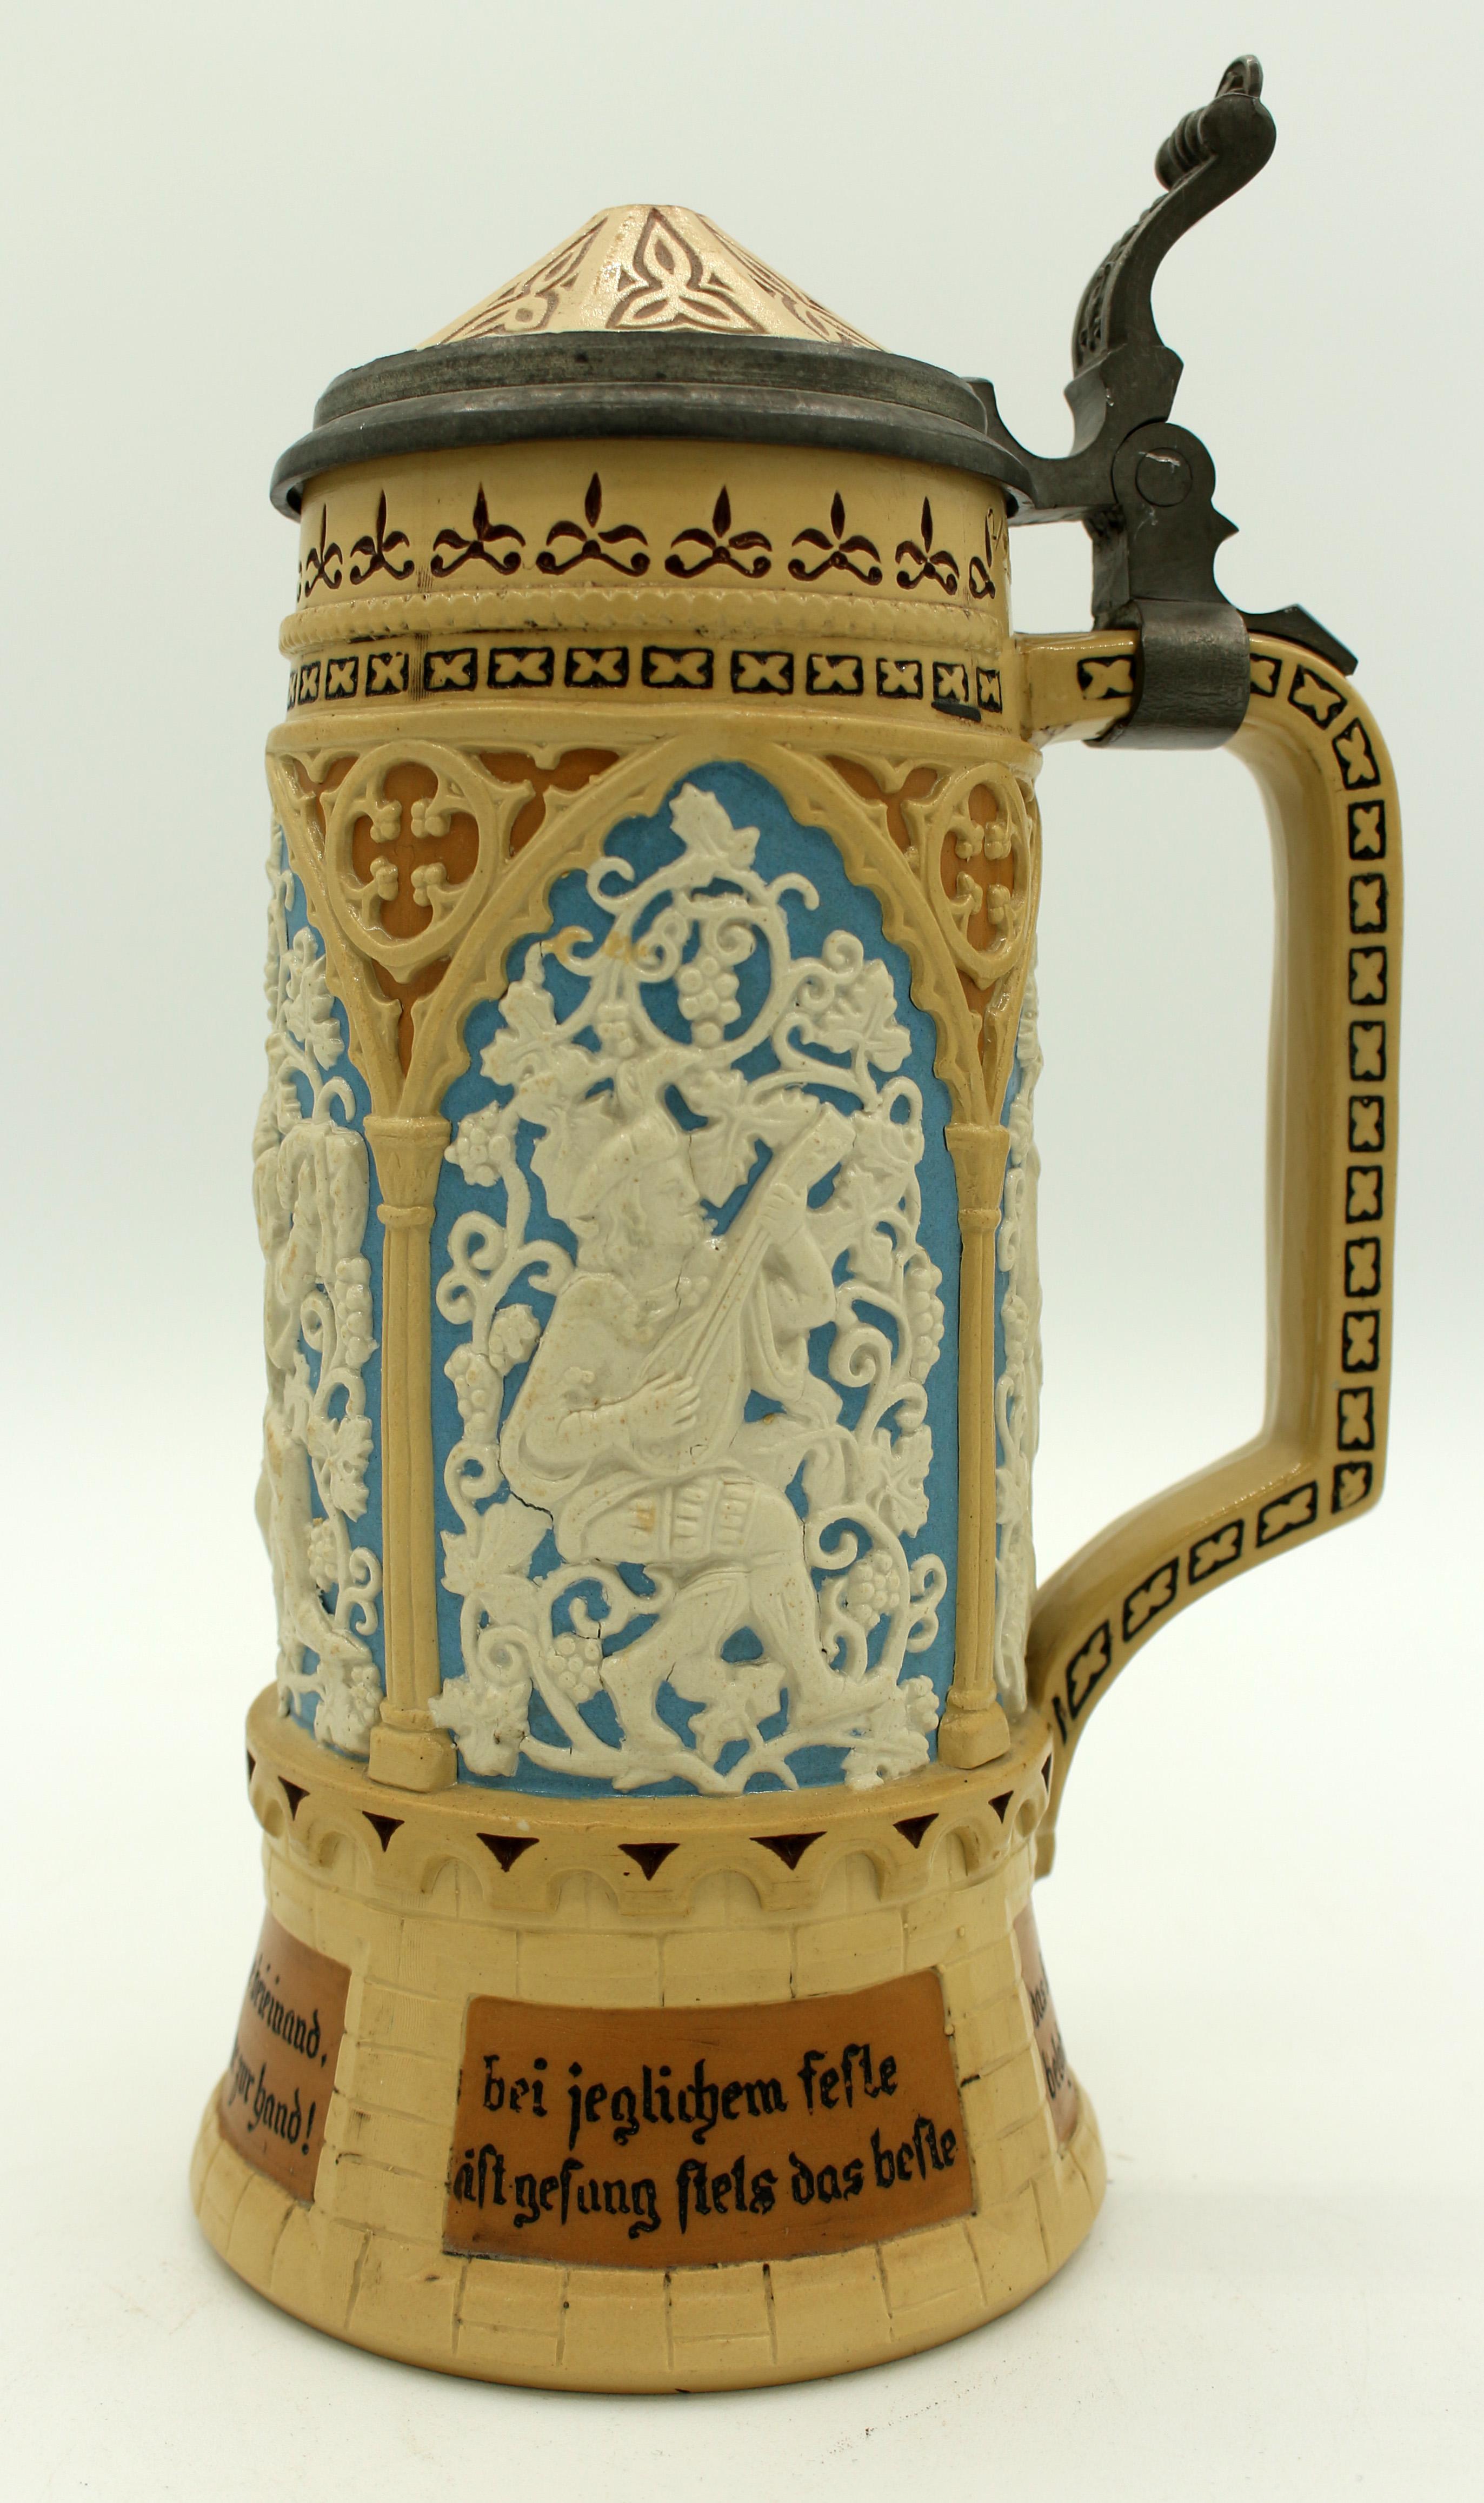 Antique c.1870 stoneware stein by Mettlach Villeroy & Boch. Green mark #228. Pewter flip cover in Gothic style. Each elaborate arch has drinking music & romantic scenes. Additional marks 93 & 20 impressed. Hairline above handle, inner rim nick is